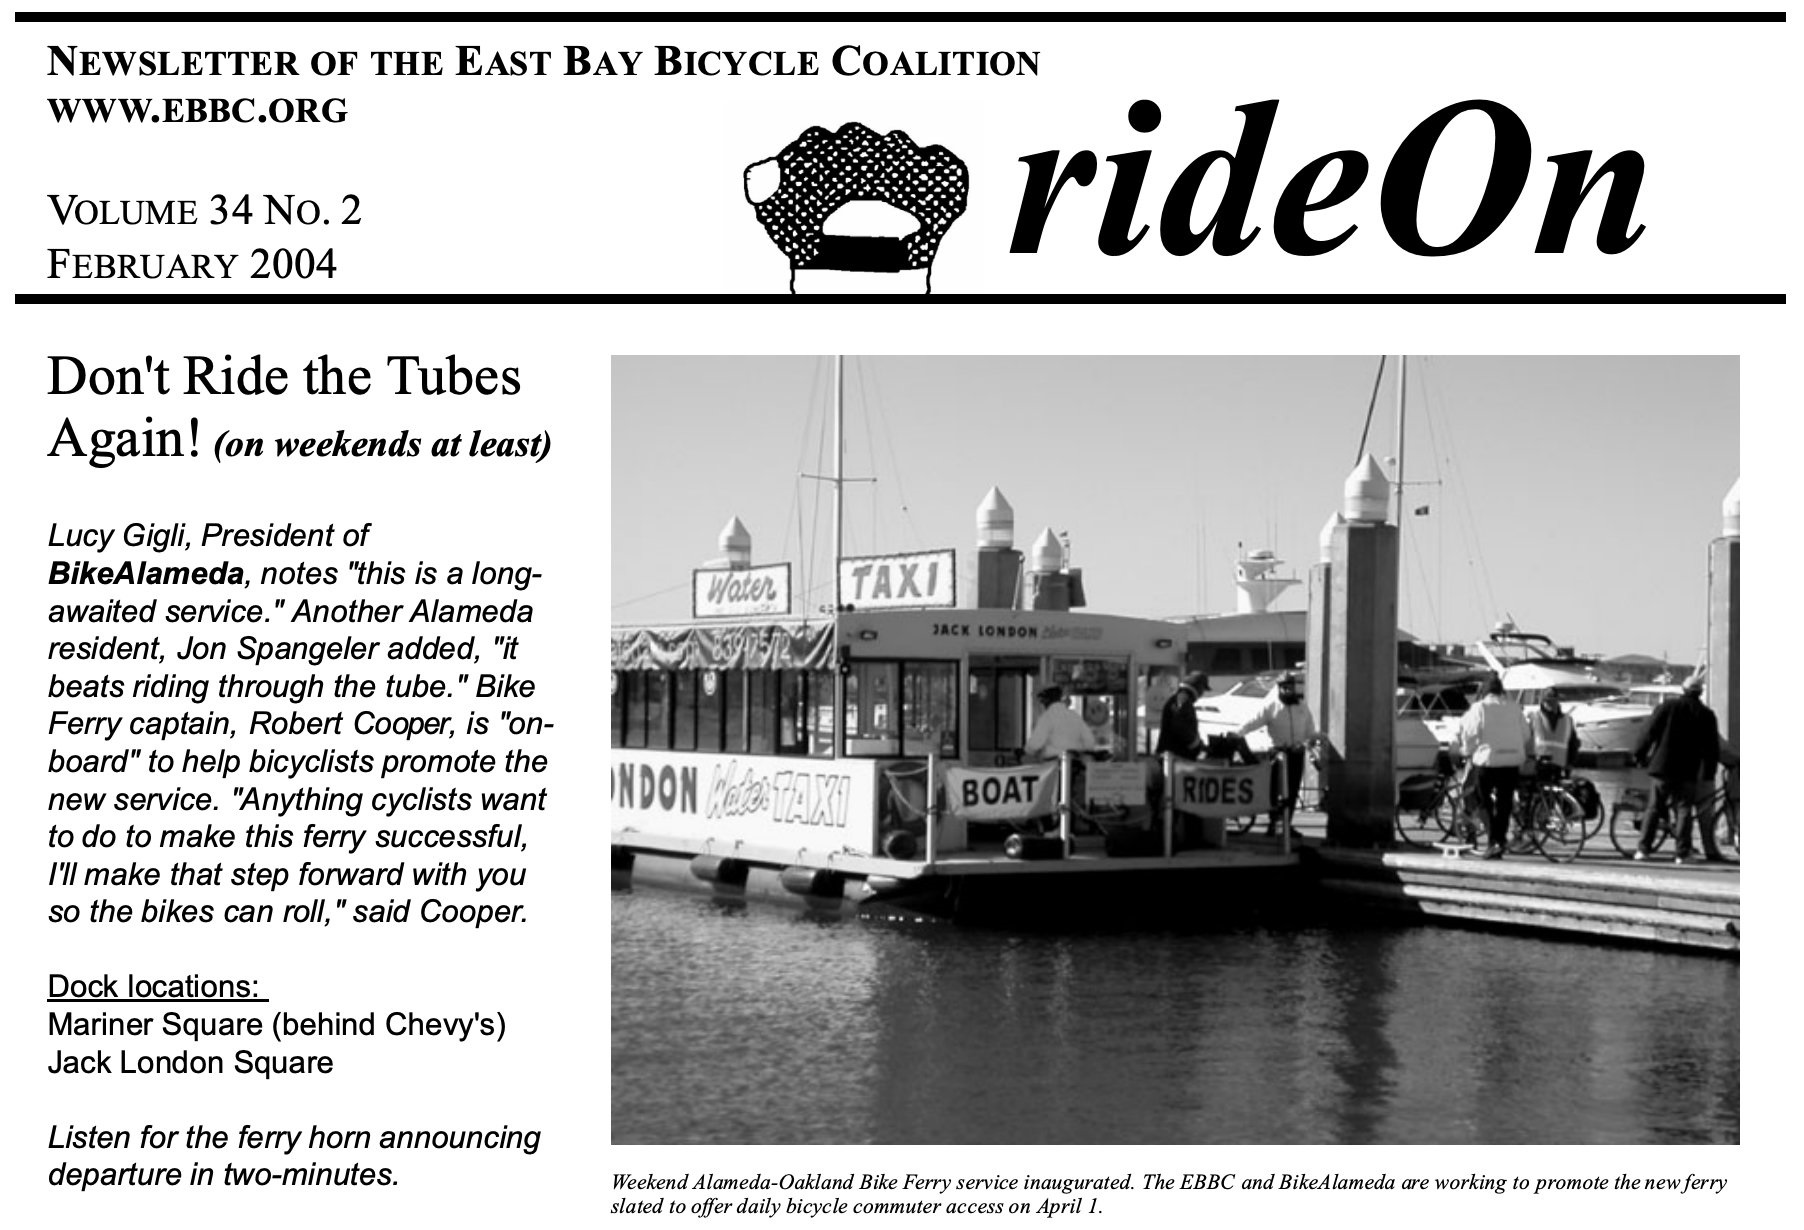 Newsletter clipping about previous water taxi in 2004